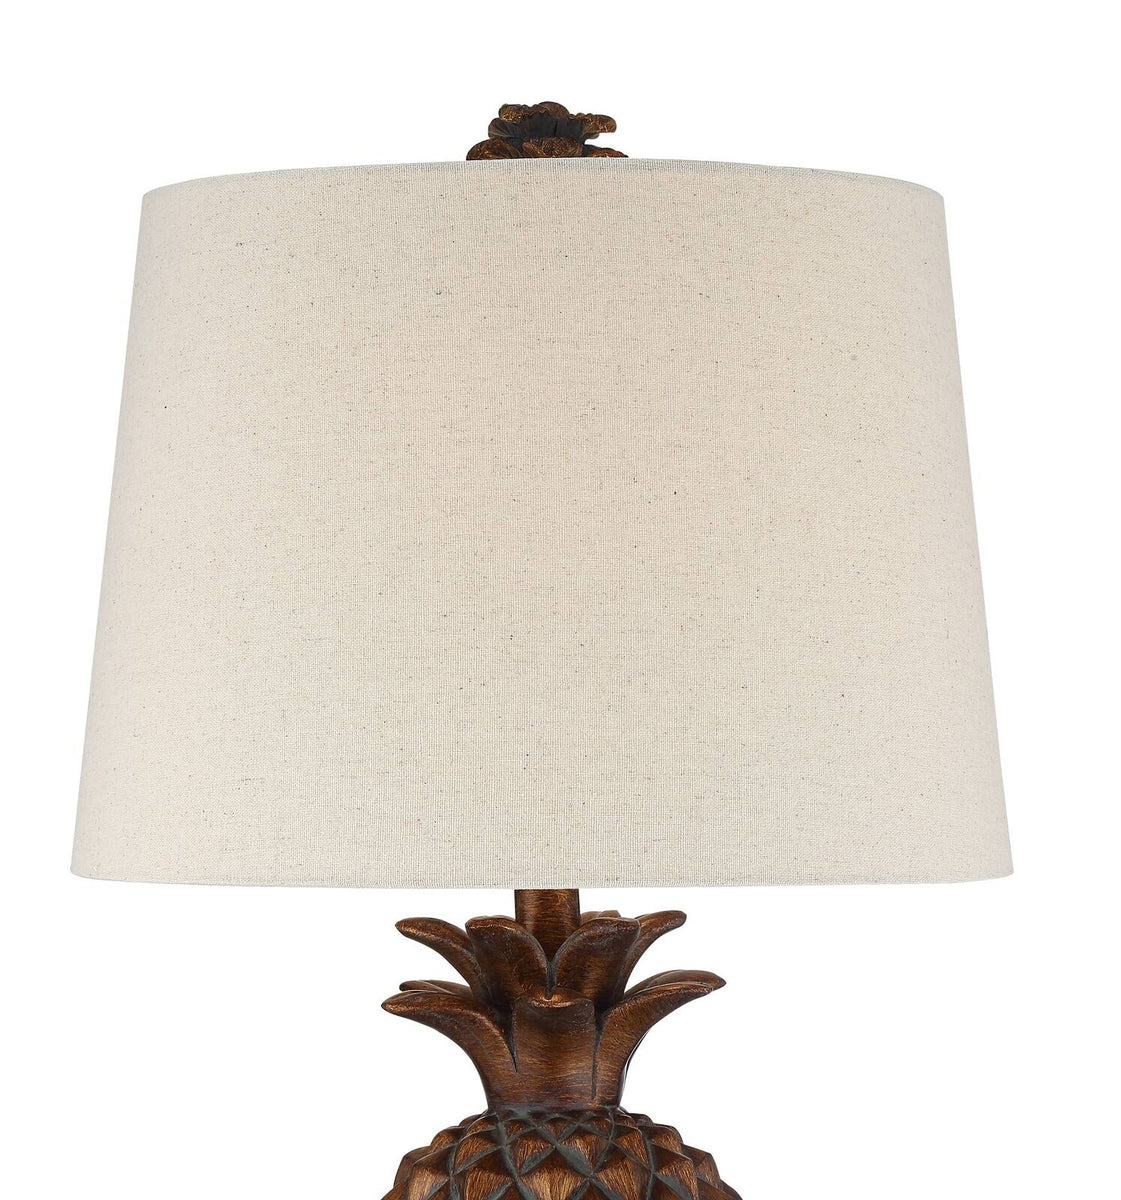 Brown Pineapple Design Accent Table Lamps with Fabric Shades Set of 2